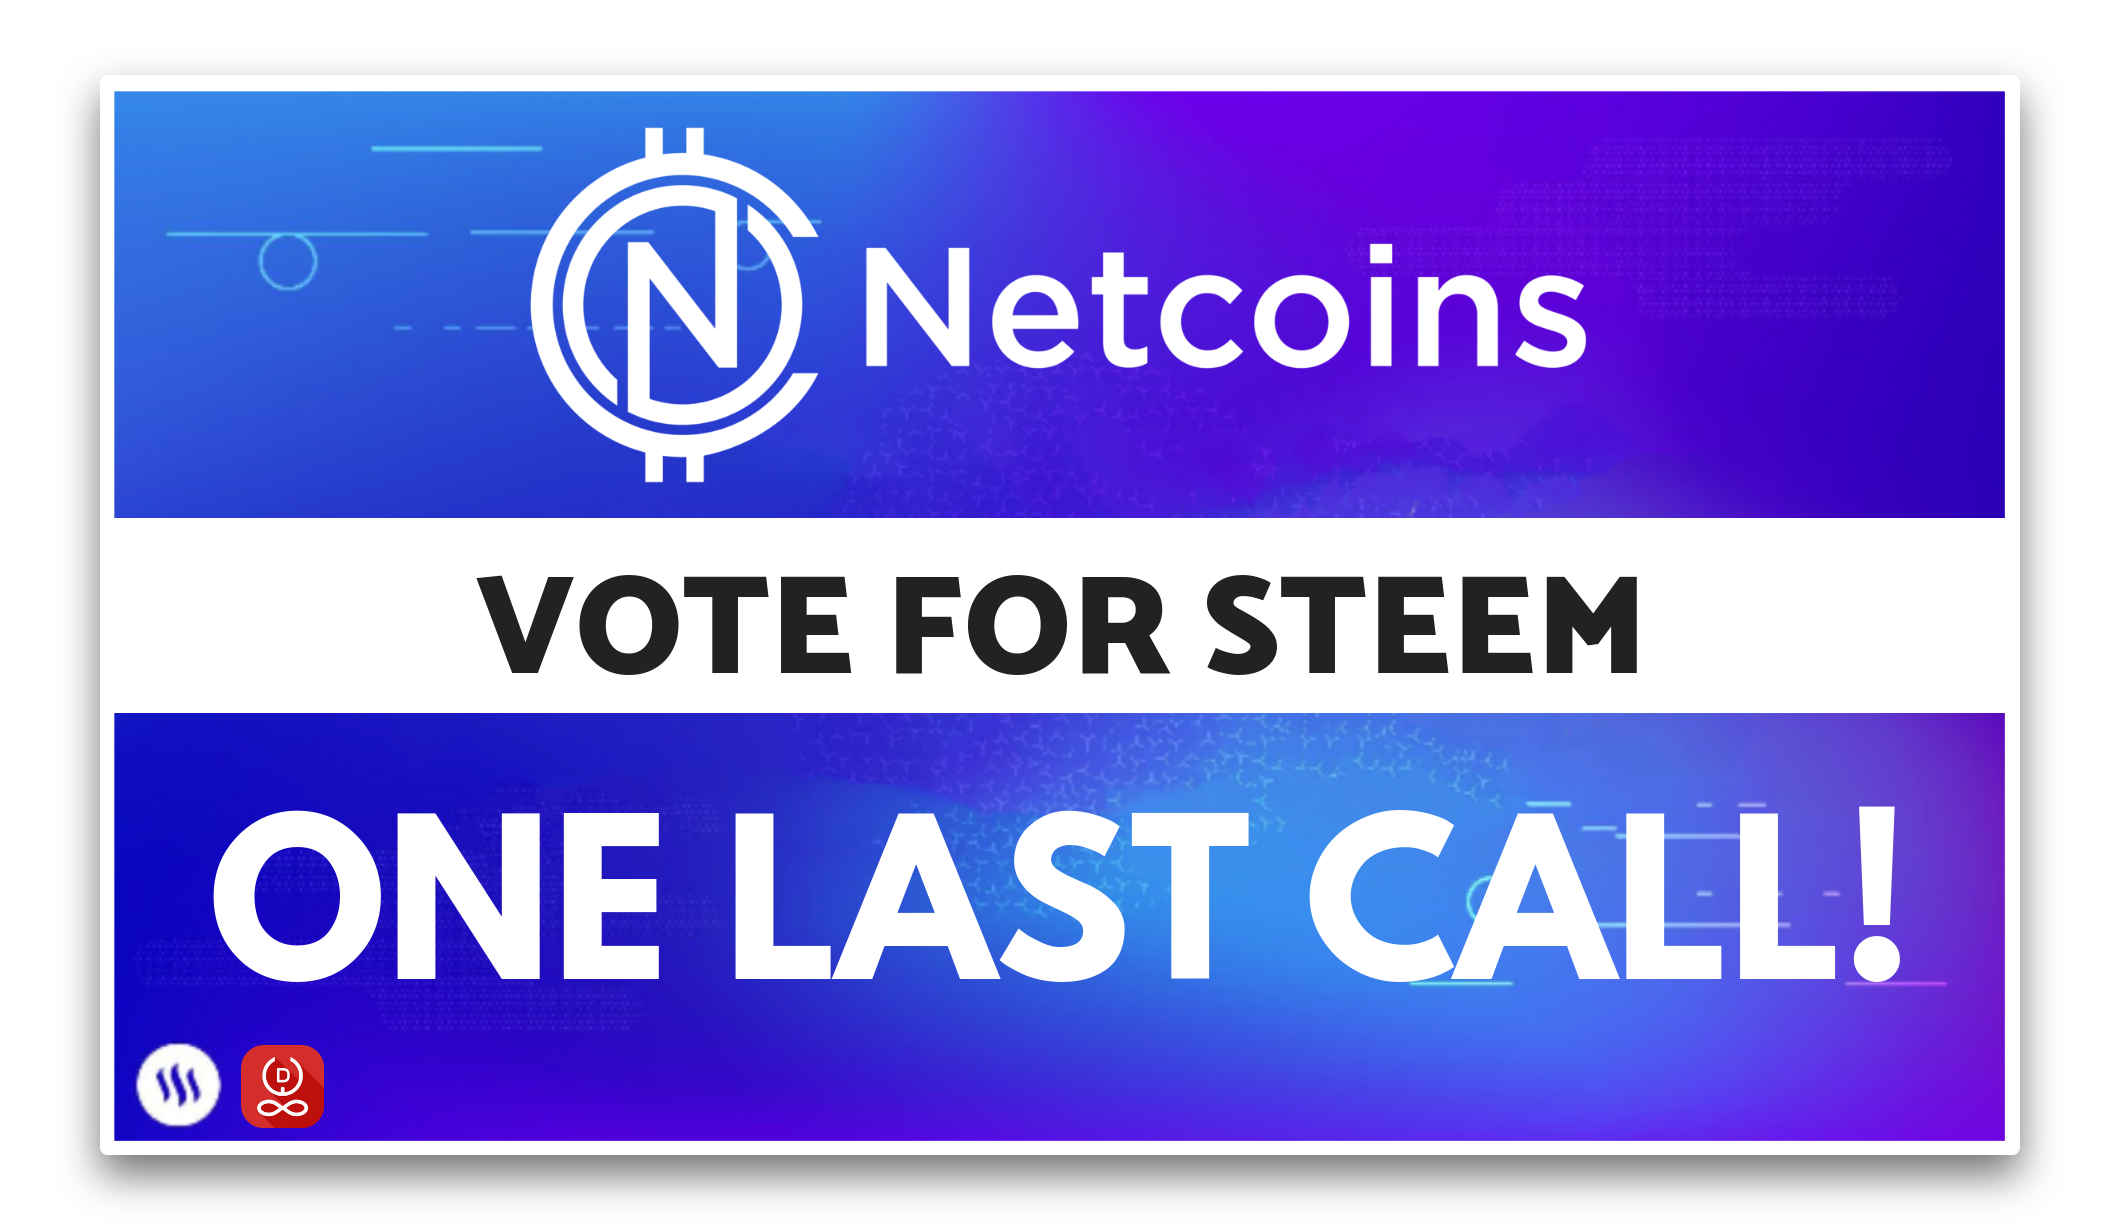 Final call! Let’s try our best to get STEEM listed!